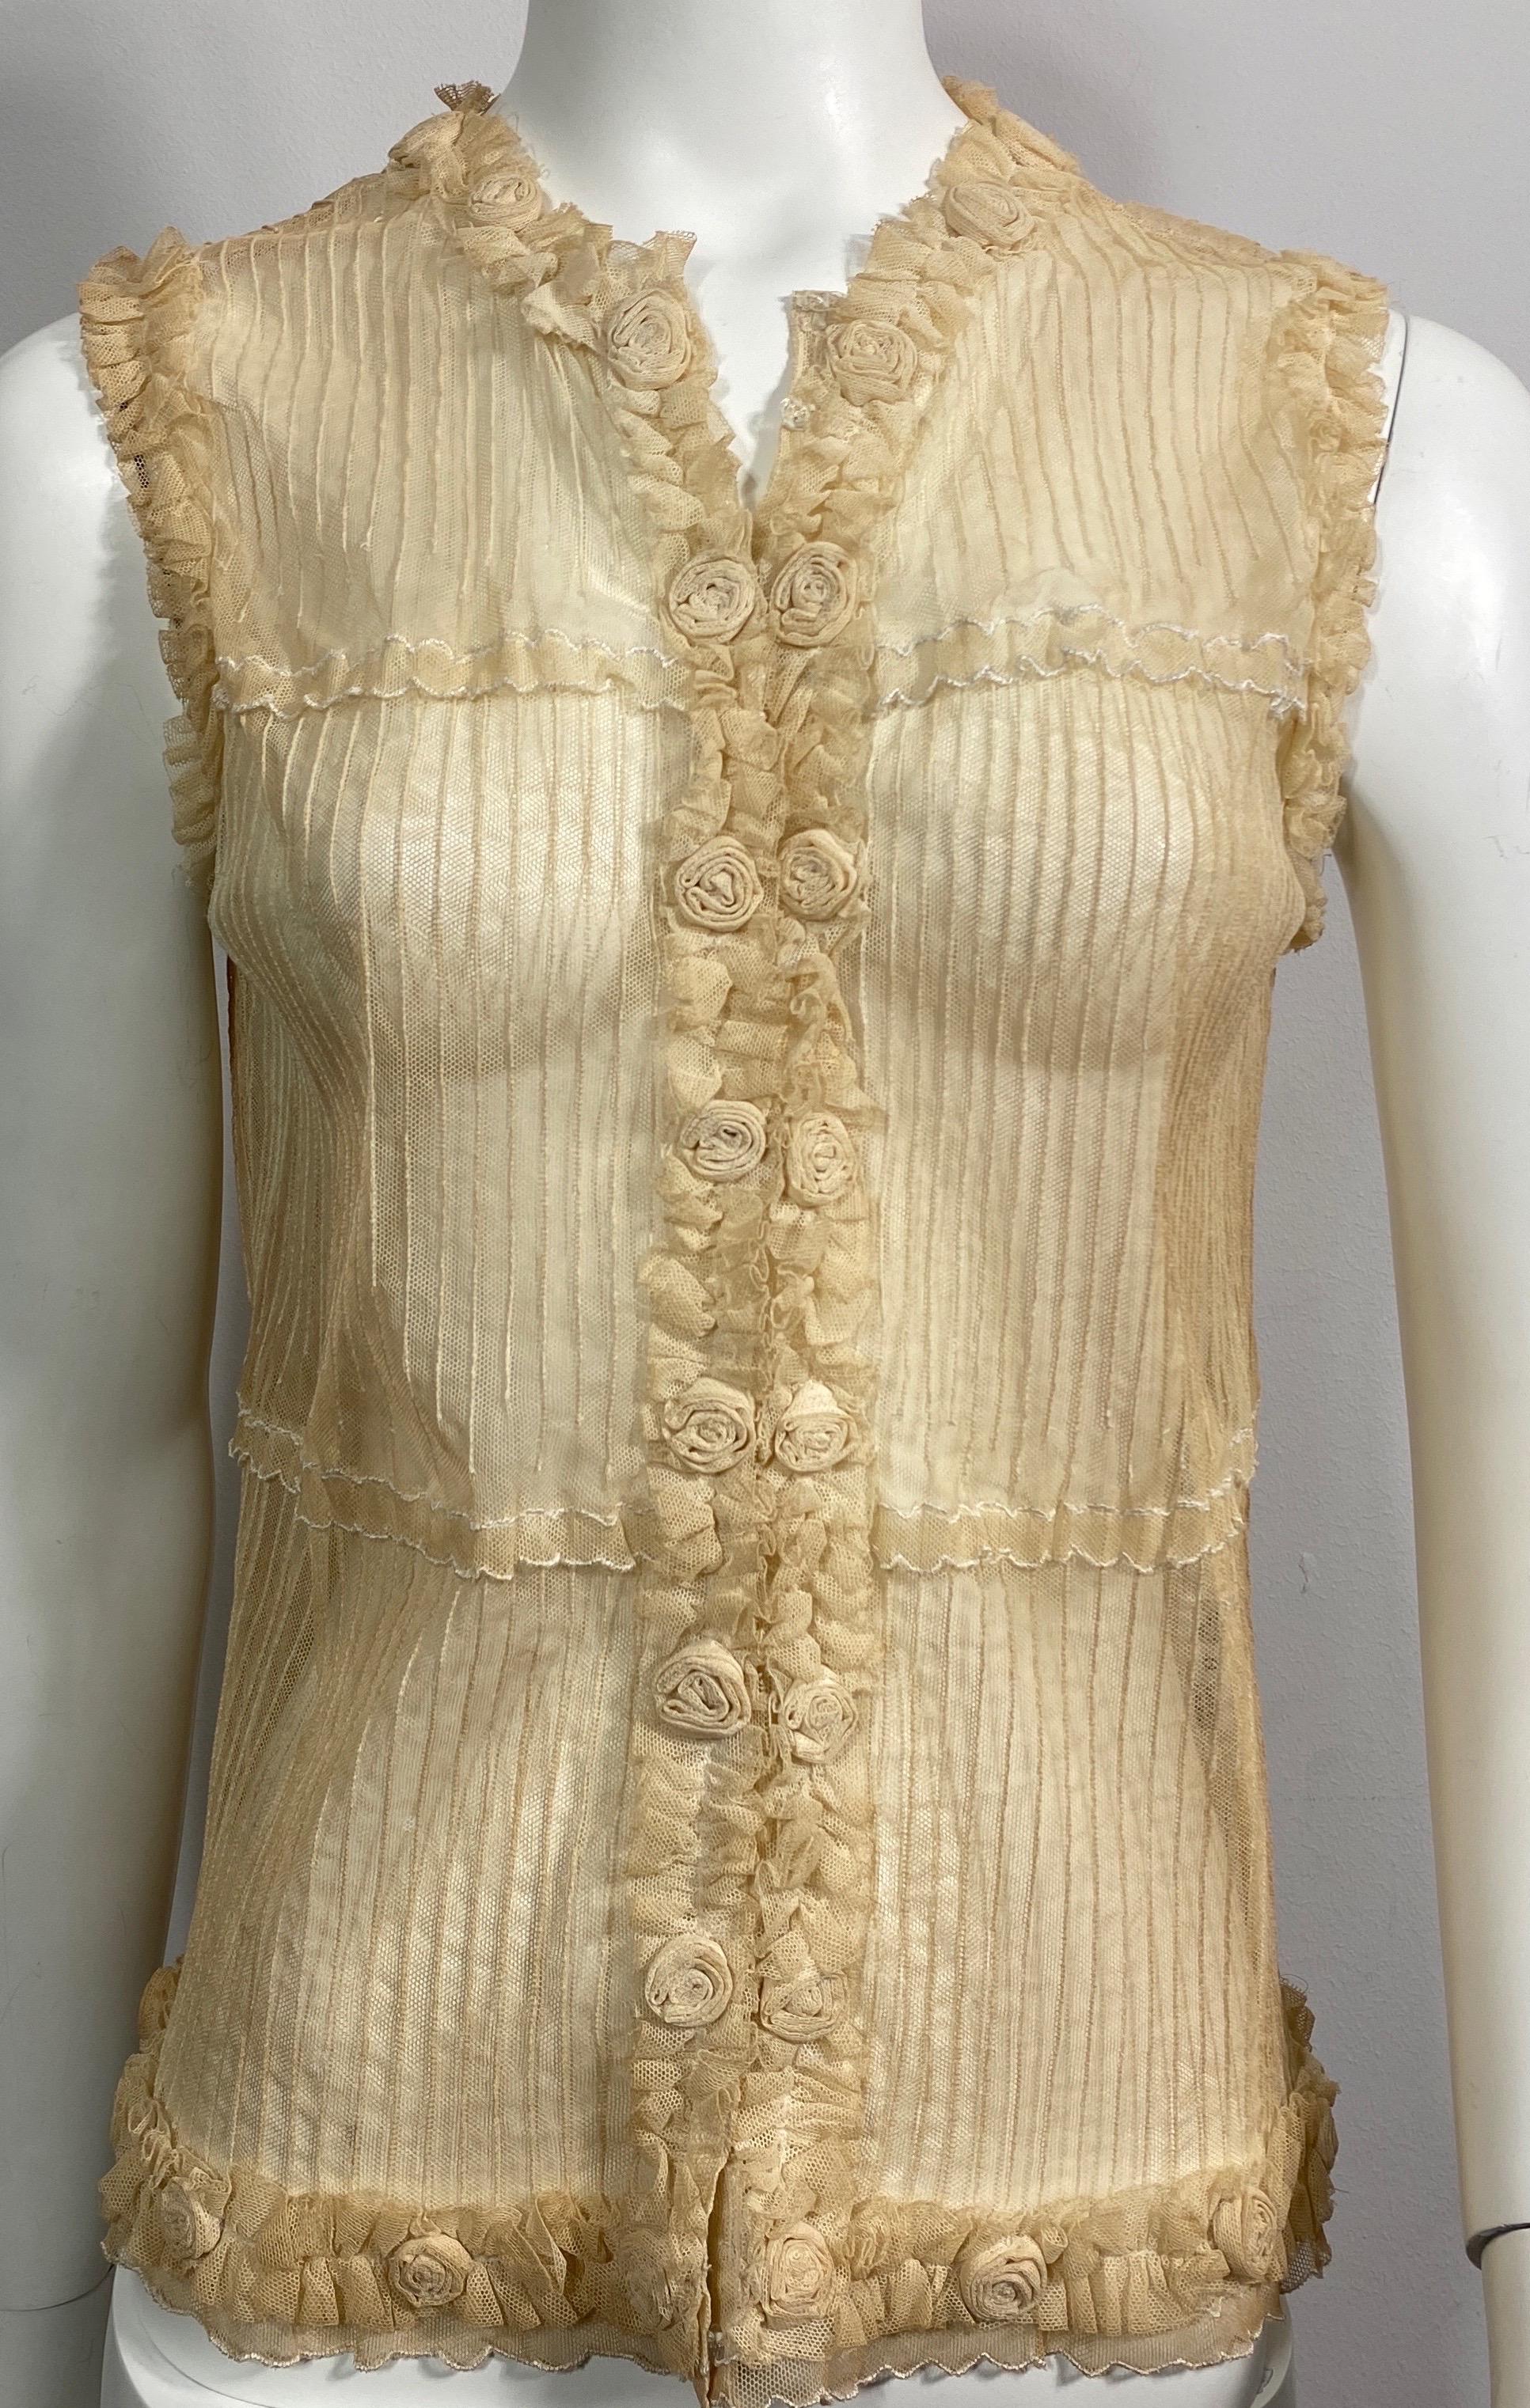 Oscar de la Renta Cream Transparent Sheer Mesh Sleeveless Top-Size 8 This cream colored see-though Sheer Mesh top has Vertical corded lines , 2 horizontal mini ruffle trim applique that have white stitching on the edges, rose petal looking detail